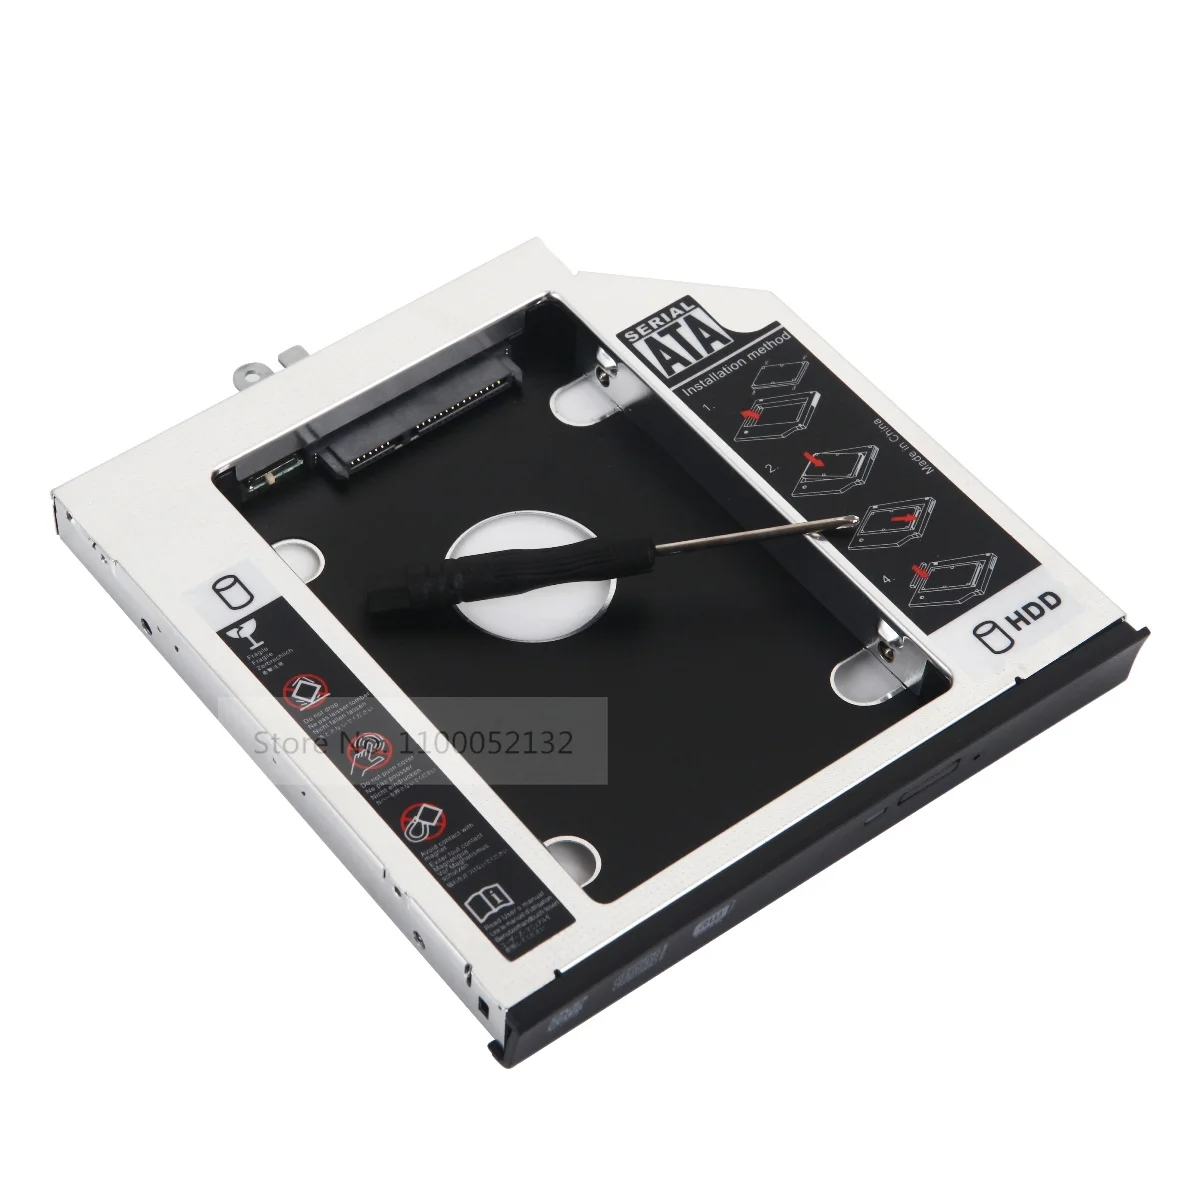 

Faceplate Bezel Panel 2nd SSD HDD Hard Drive Caddy Tray Bracket for HP ProBook 4320s 4321s 4325s 4326s 4420s 4421s 4425s 4426s